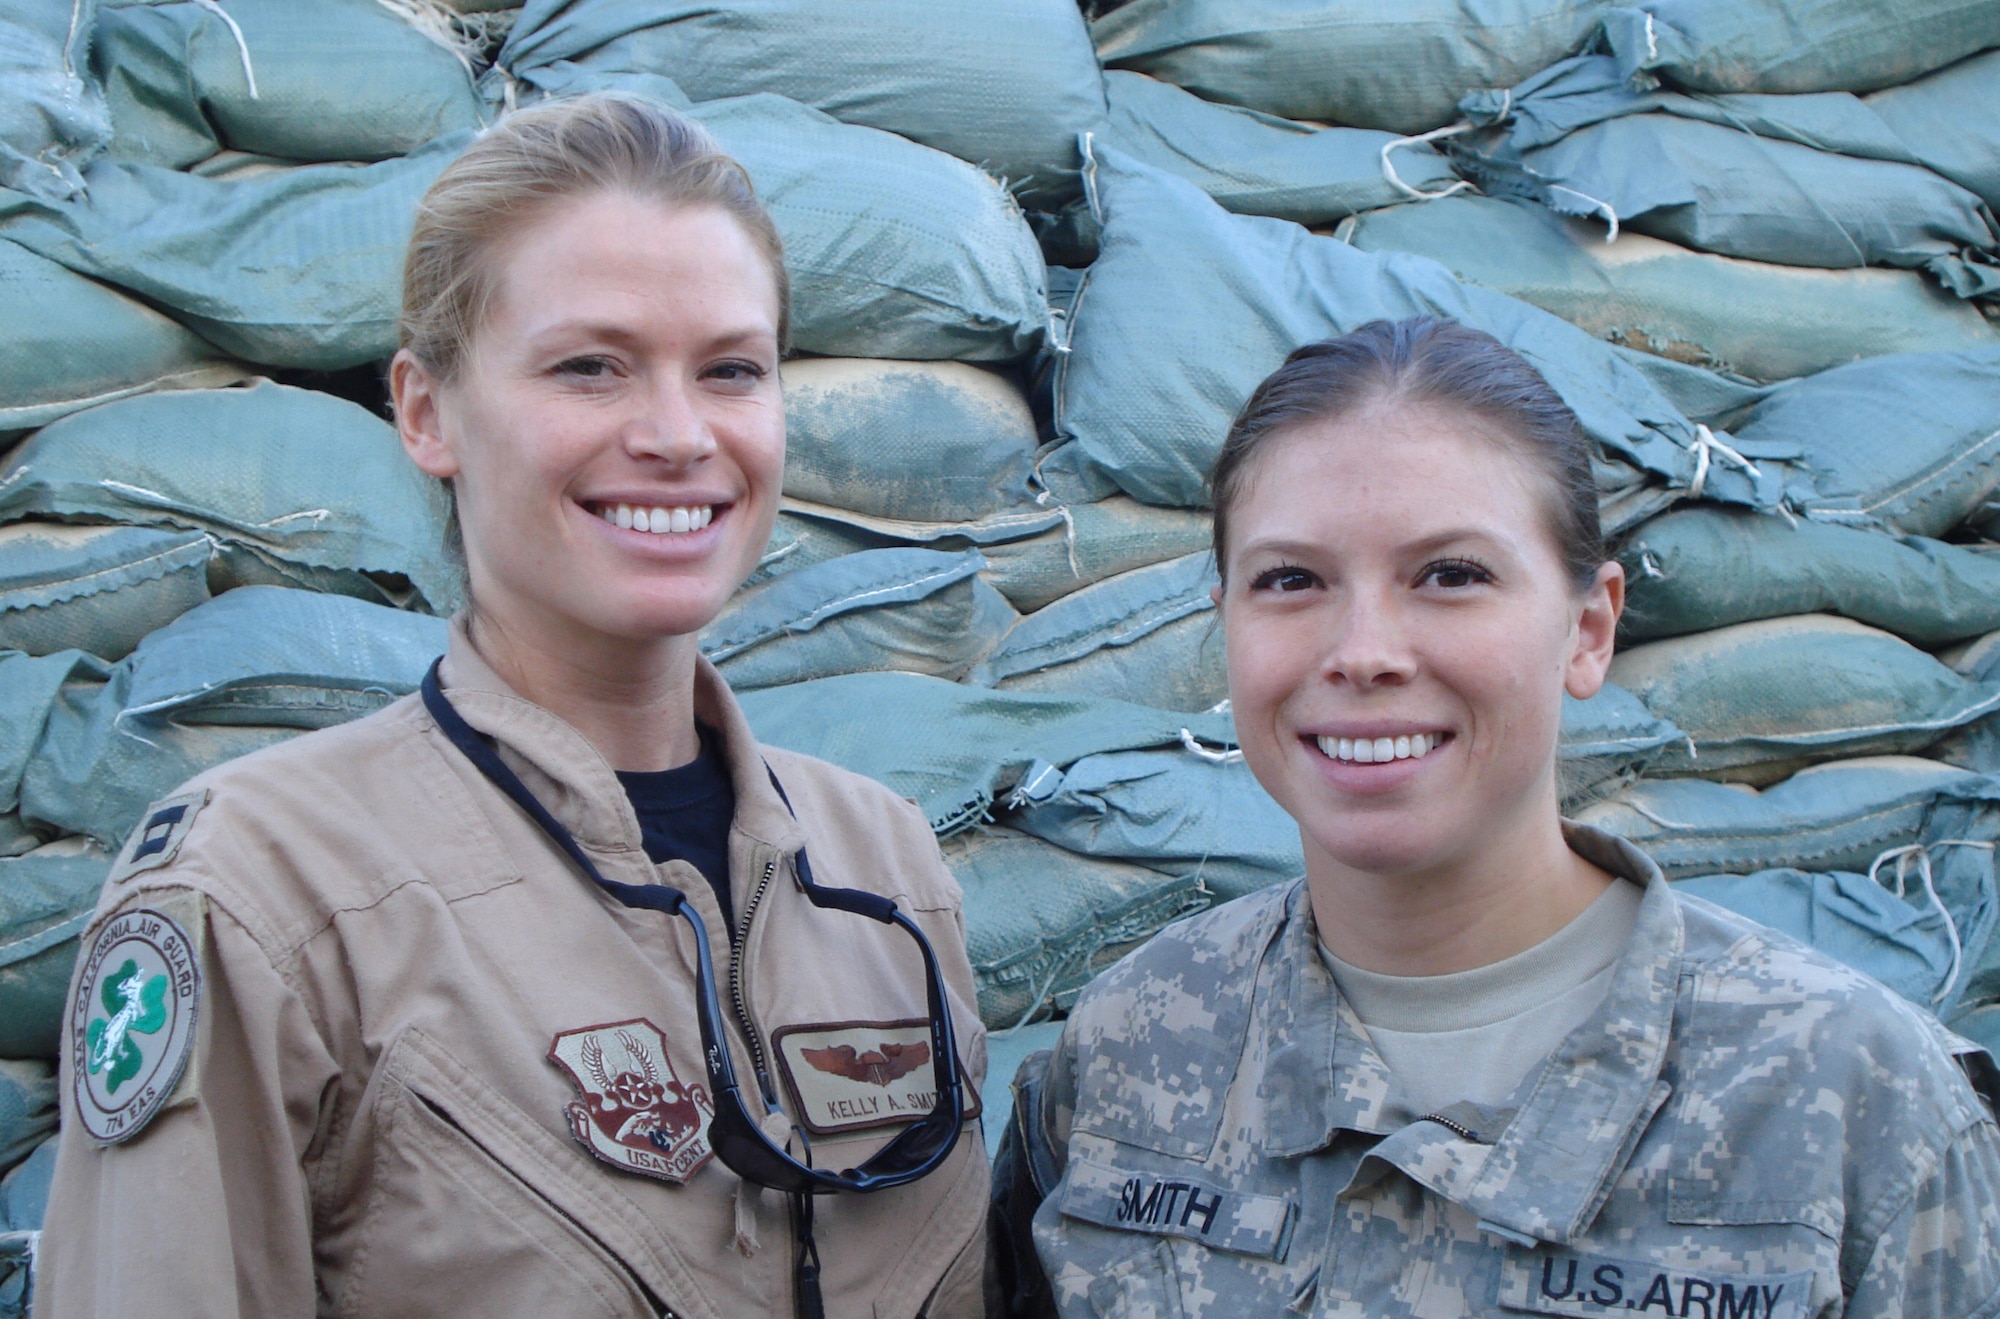 BAGRAM AIR FIELD, Afghanistan -- Capt. Kelly Smith and Army Chief Warrant Officer Amber Smith, sisters from White Salmon, Wash., pose for a picture together here July 15, 2008. Captain Smith, a C-130 pilot, and Warrant Officer Smith, a OH-58 Kiowa pilot, both deployed to Afghanistan and spent a few weeks together at Bagram. (U.S. Air Force photo by Staff Sgt. Rachel Martinez)